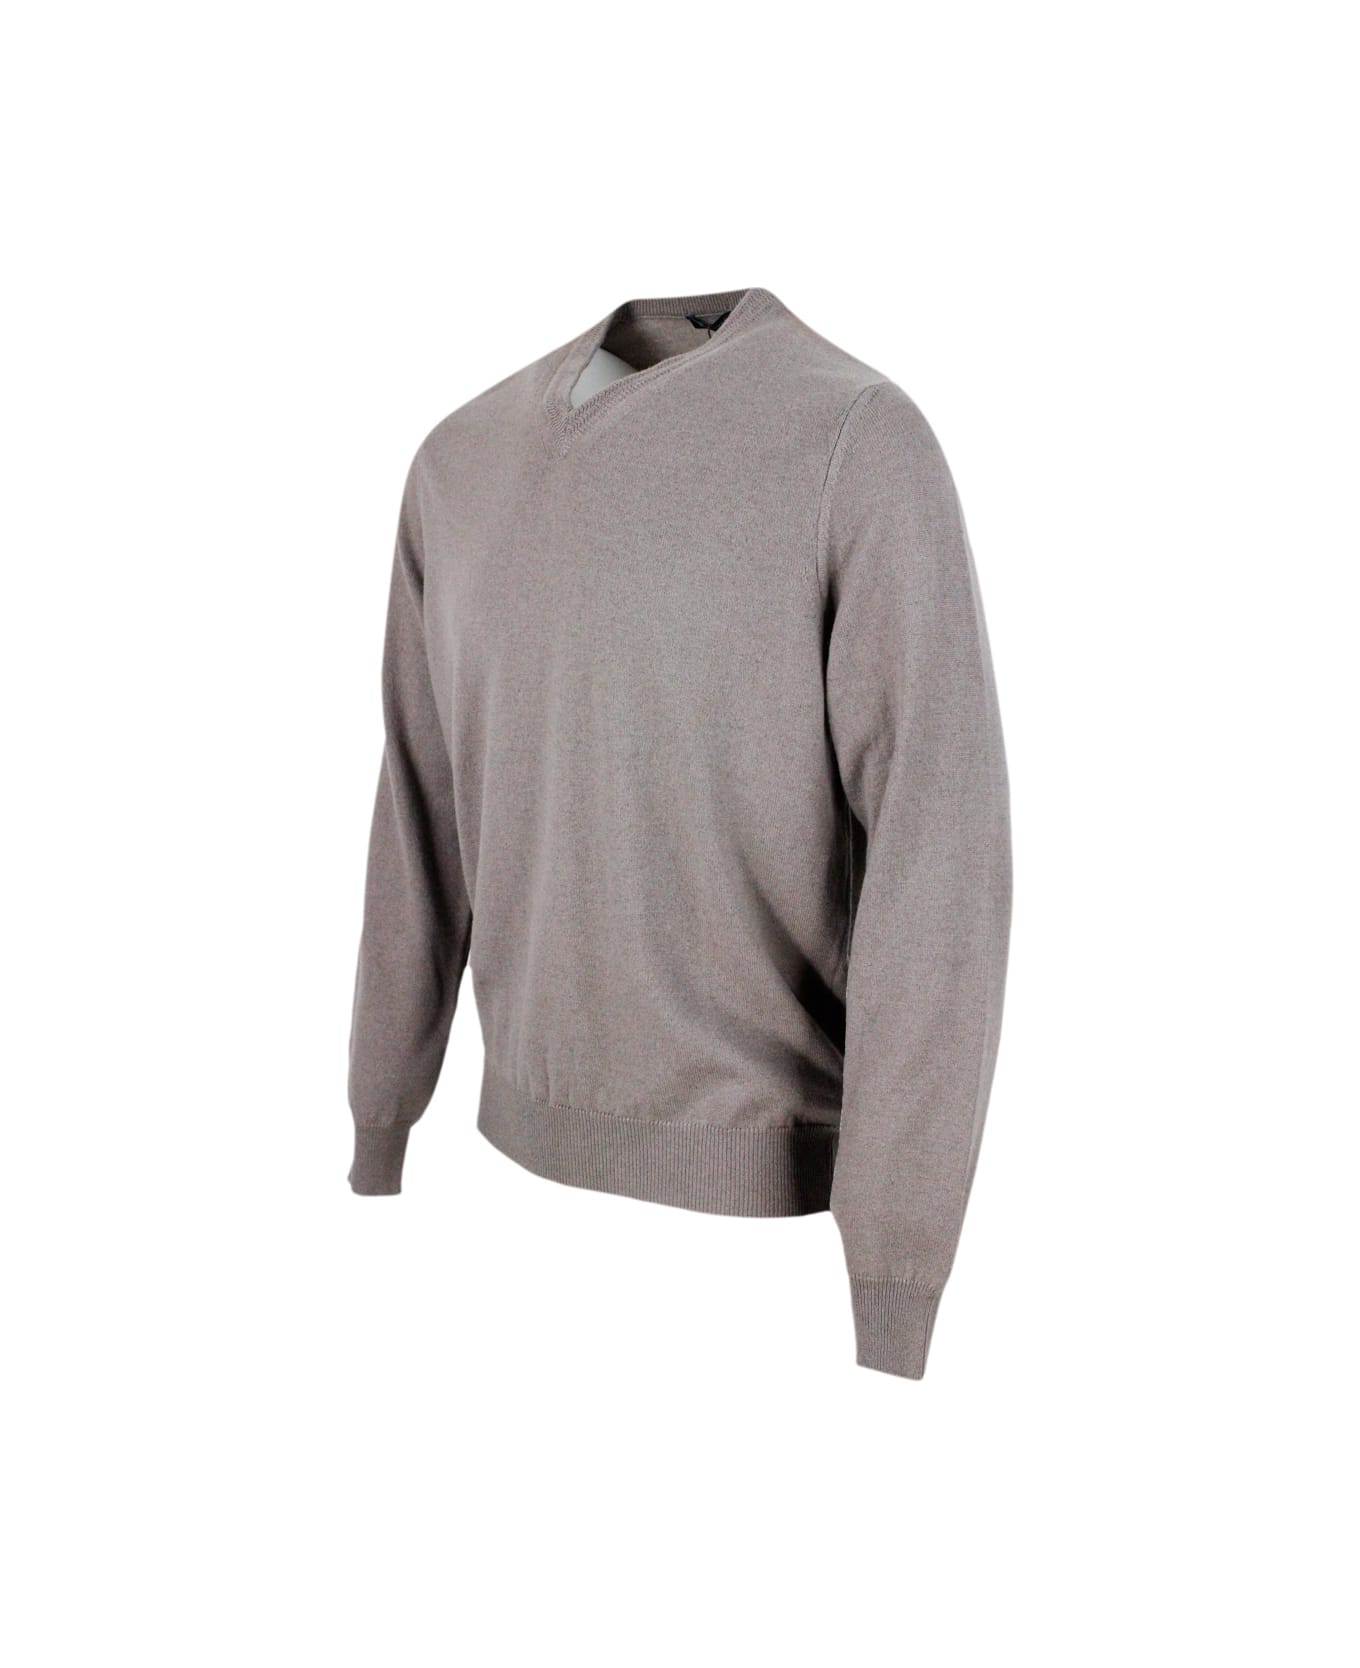 Colombo Long-sleeved V-neck Sweater In Fine 2-ply 100% Kid Cashmere With Special Processing On The Edge Of The Neck - Grey Mink